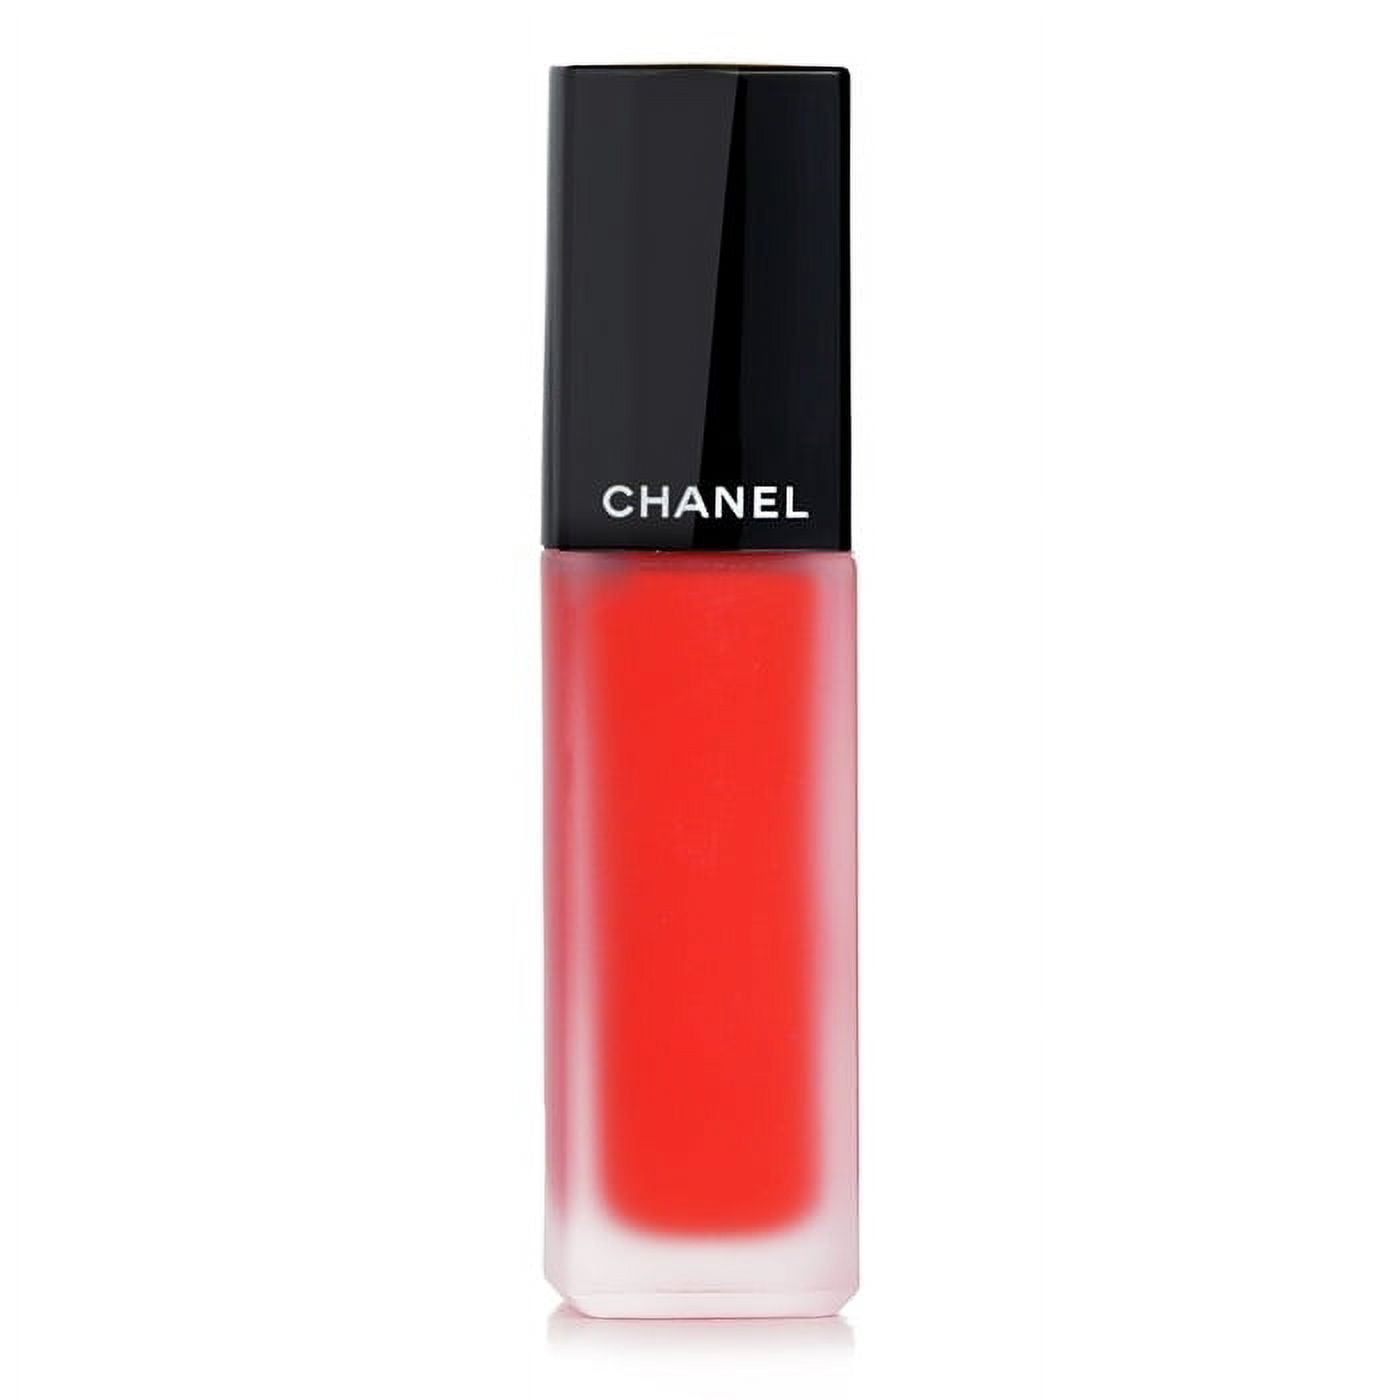 Chanel Rouge Allure Ink - 164 Entusiasta - 6ml